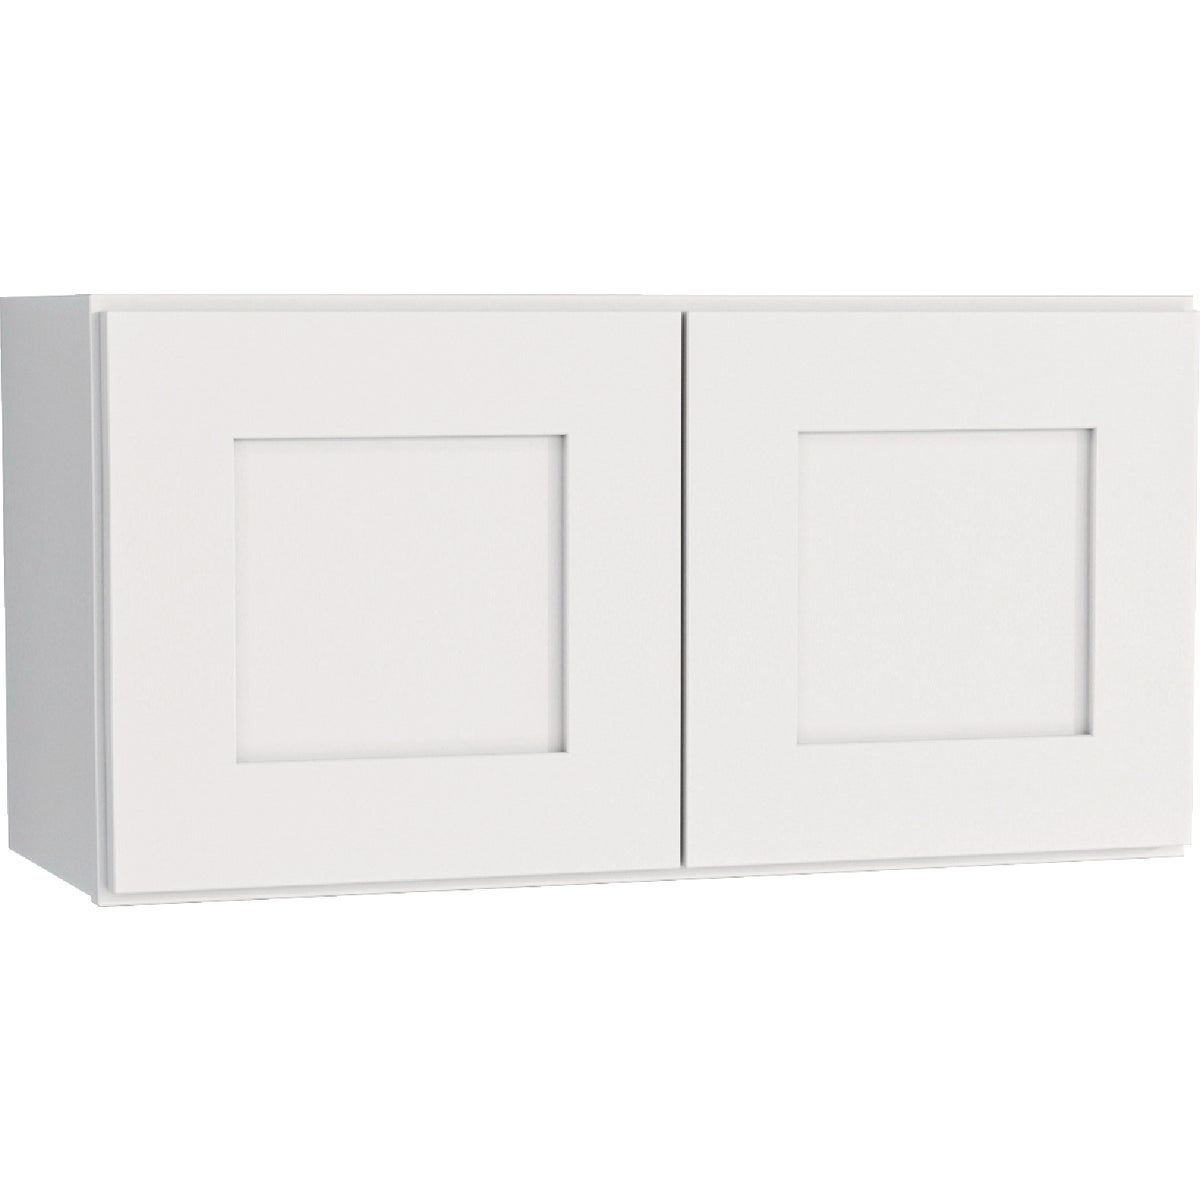 CraftMark Plymouth Shaker 30 In. W x 12 In. D x 15 In. H Ready To Assemble Bridge Kitchen Cabinet